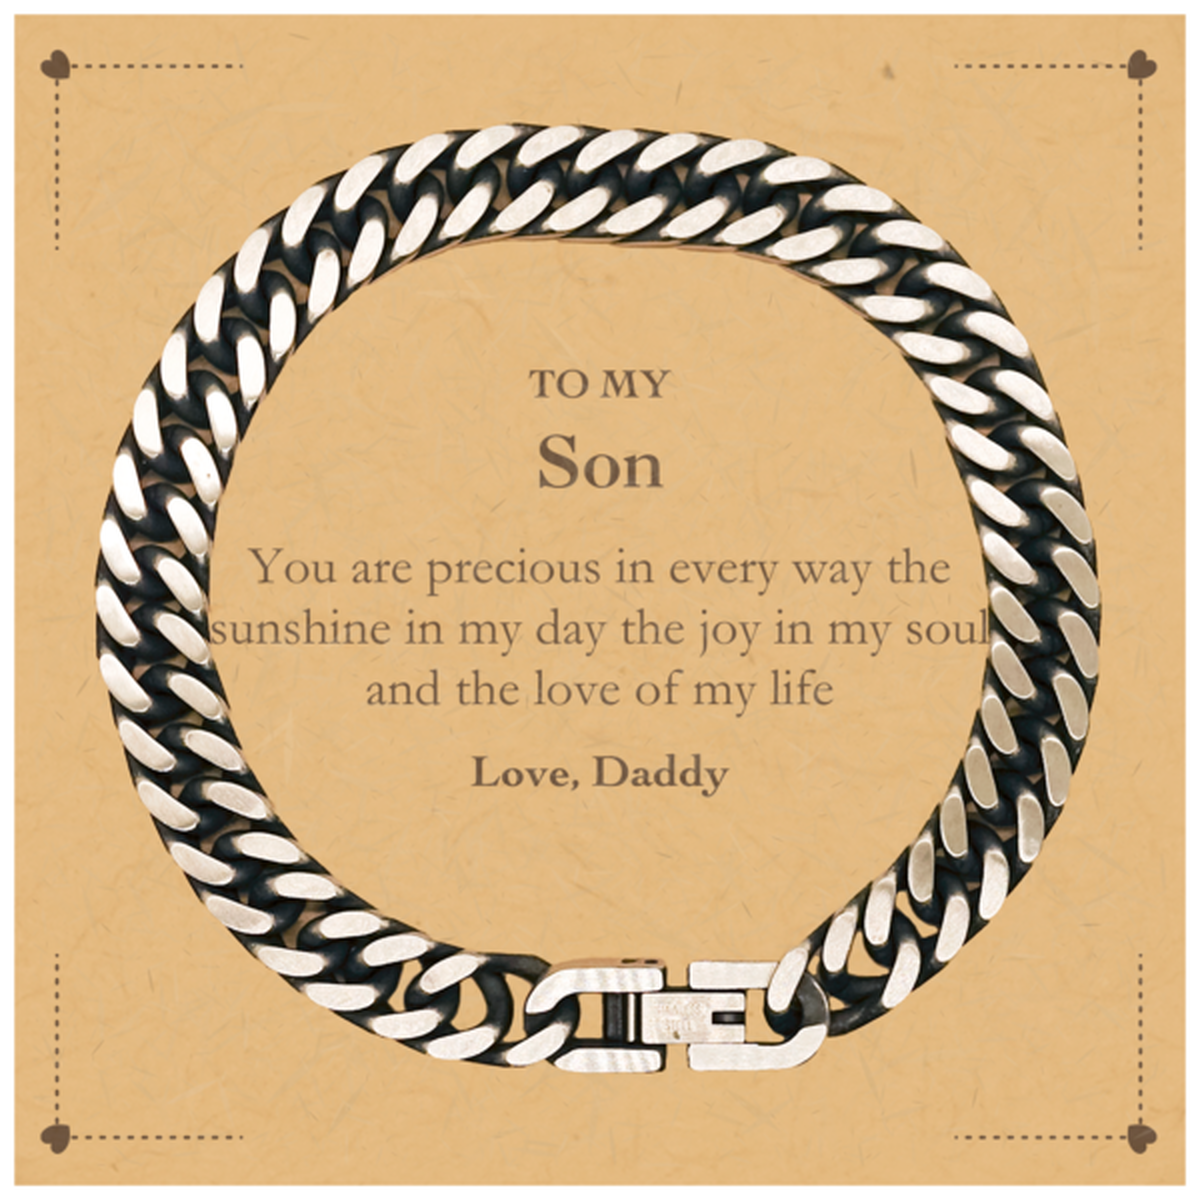 Graduation Gifts for Son Cuban Link Chain Bracelet Present from Daddy, Christmas Son Birthday Gifts Son You are precious in every way the sunshine in my day. Love, Daddy